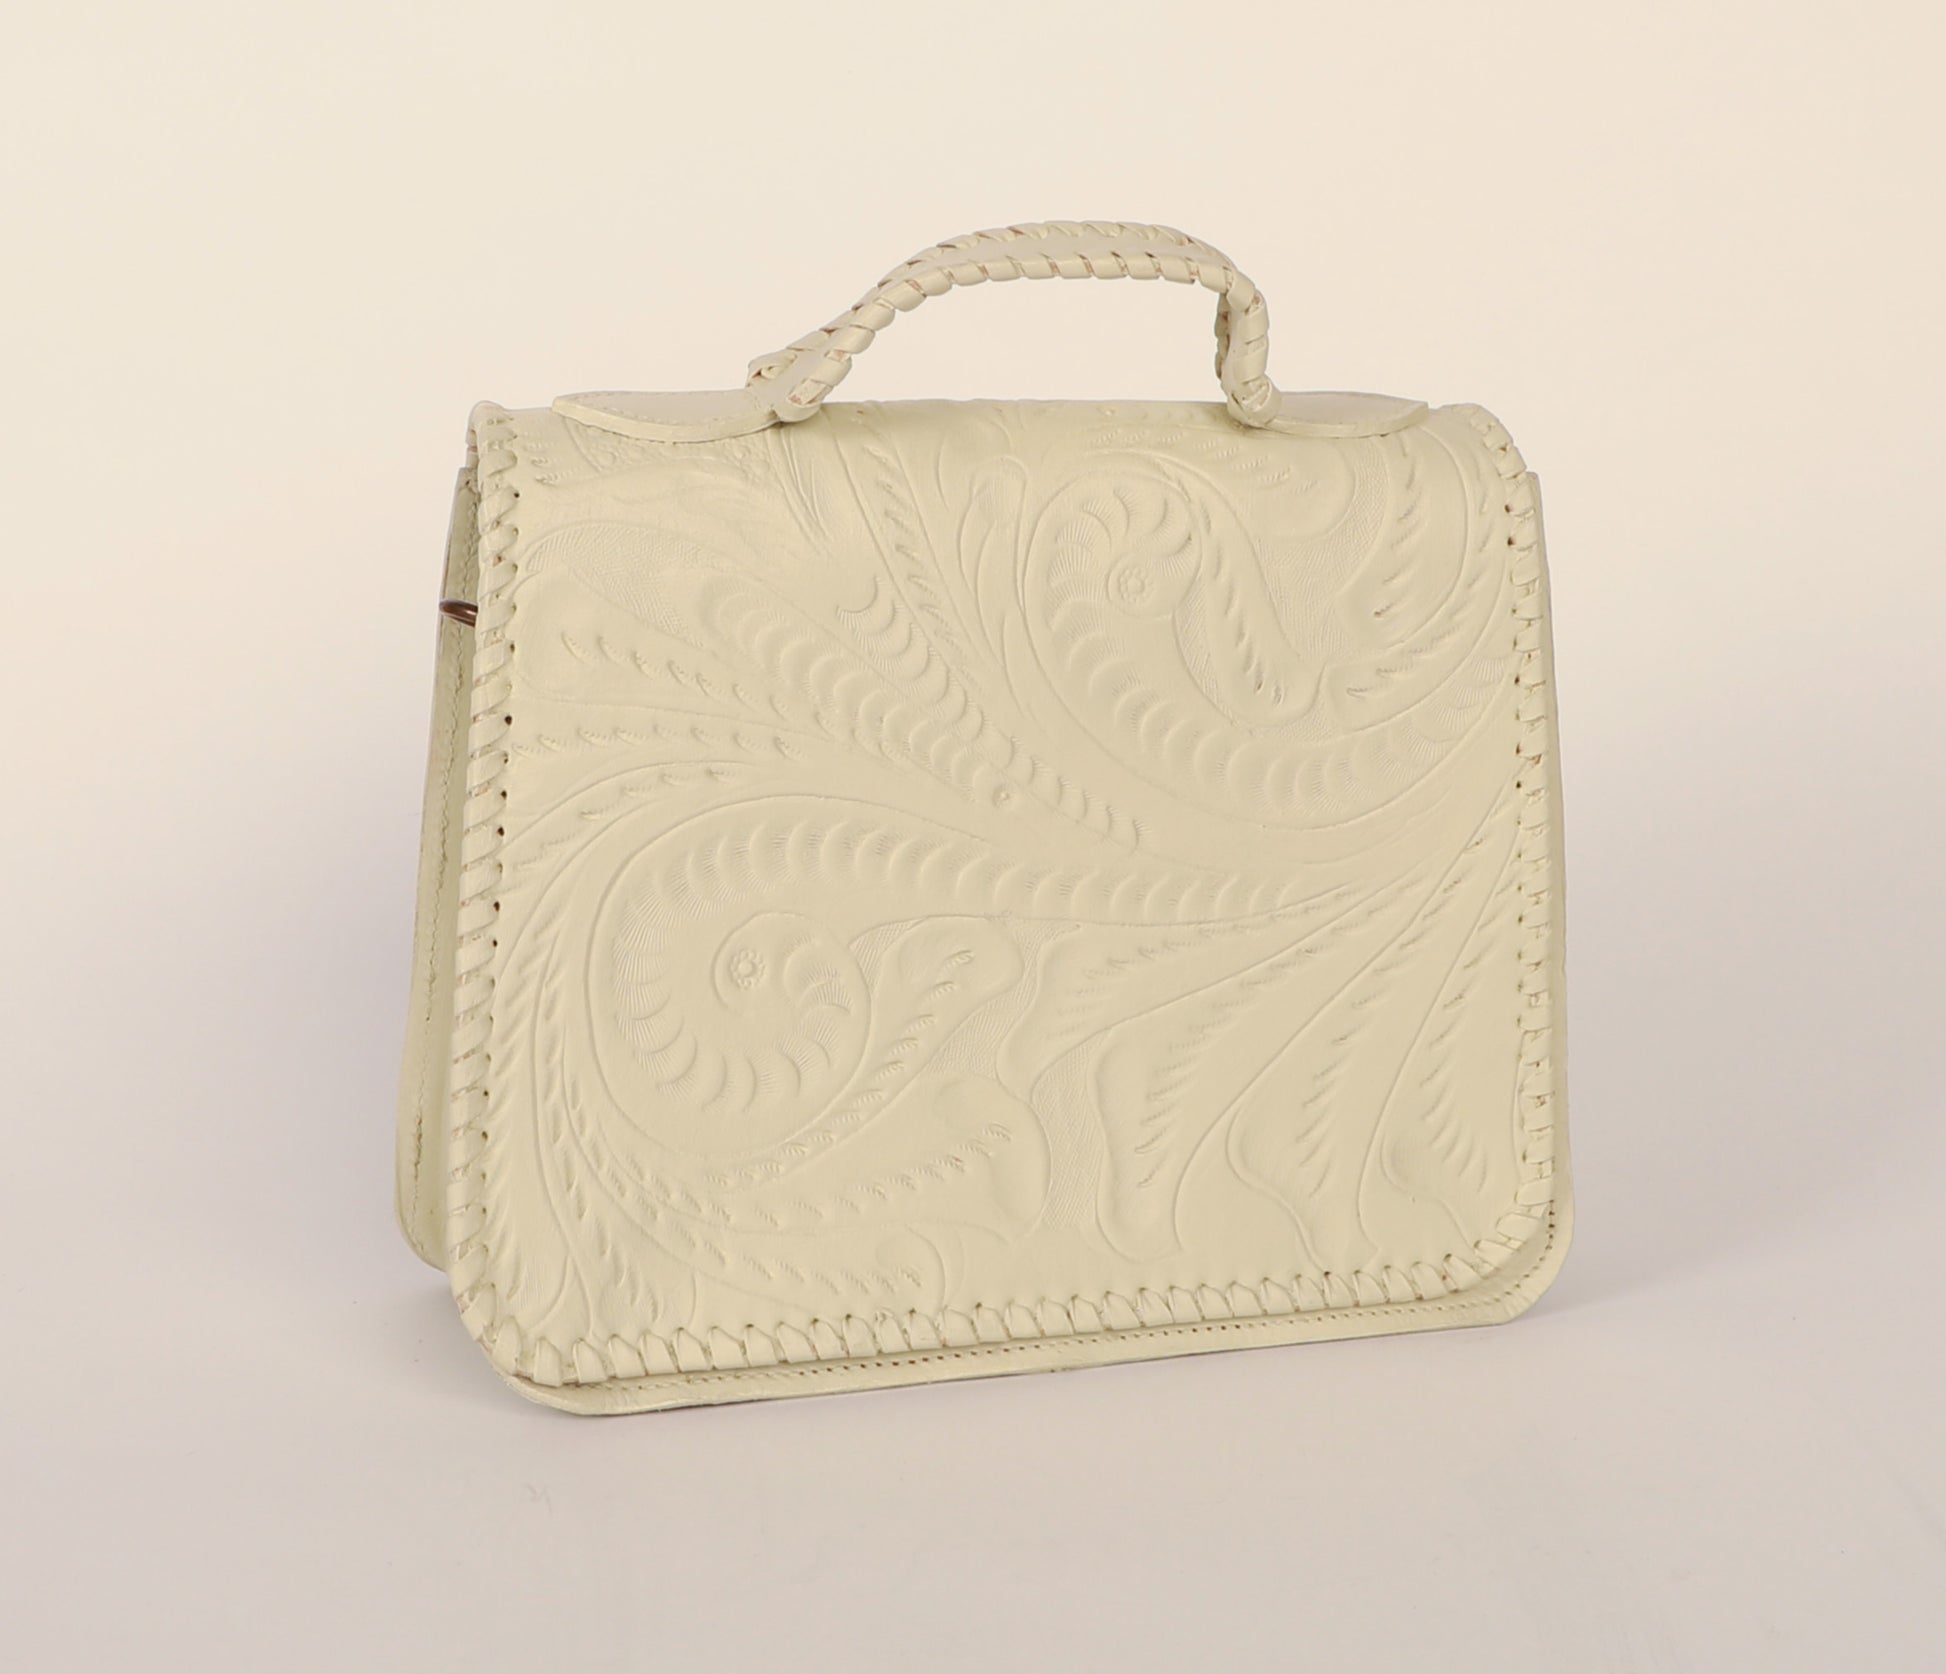 Medium-sized authentic leather handbag with a traditional mexican etching design on the upper flap. Braided handle on top. Fully lined with suede. Front view in color white.